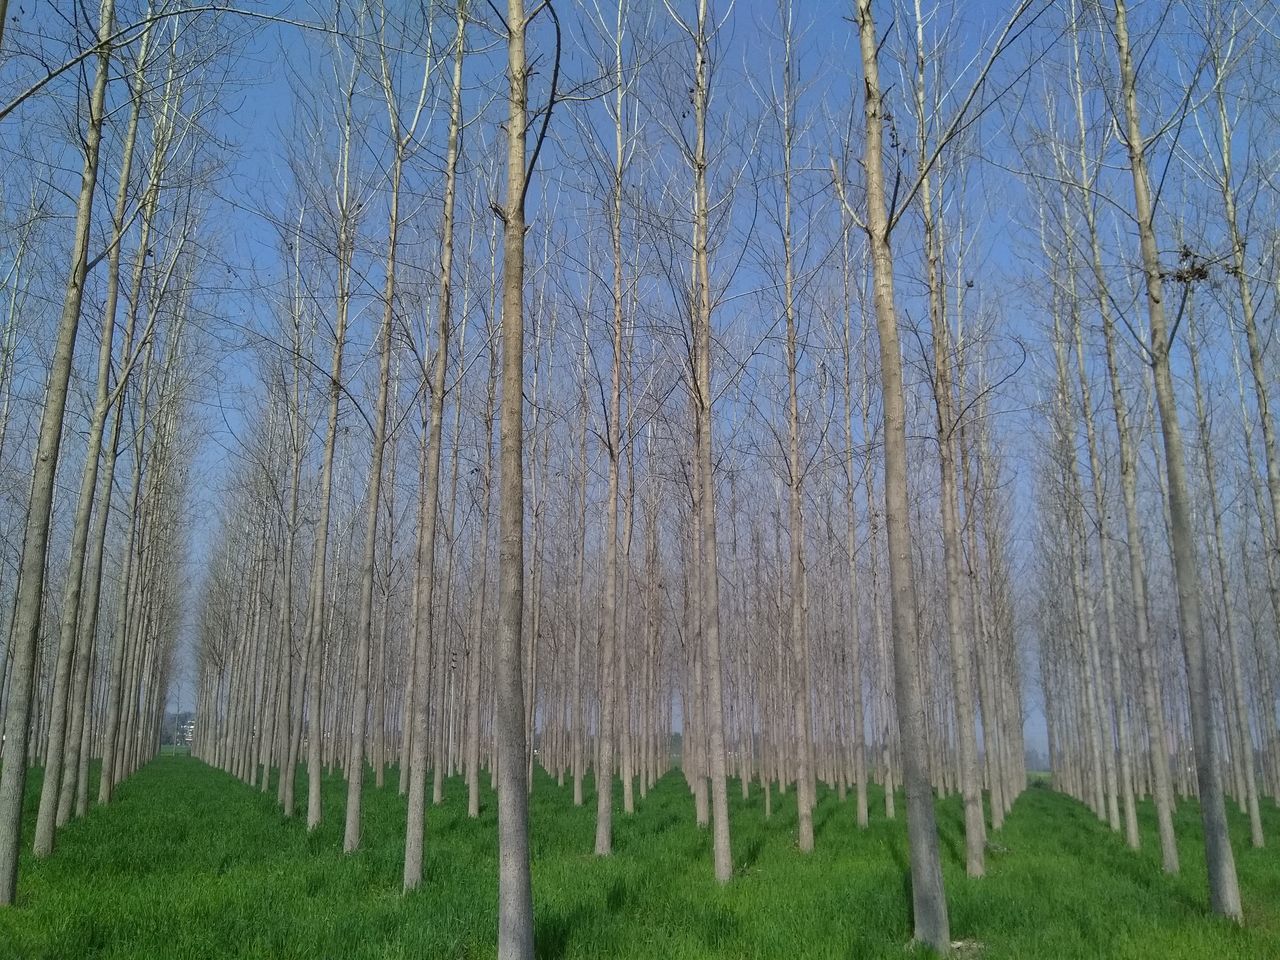 PANORAMIC SHOT OF TREES ON FIELD